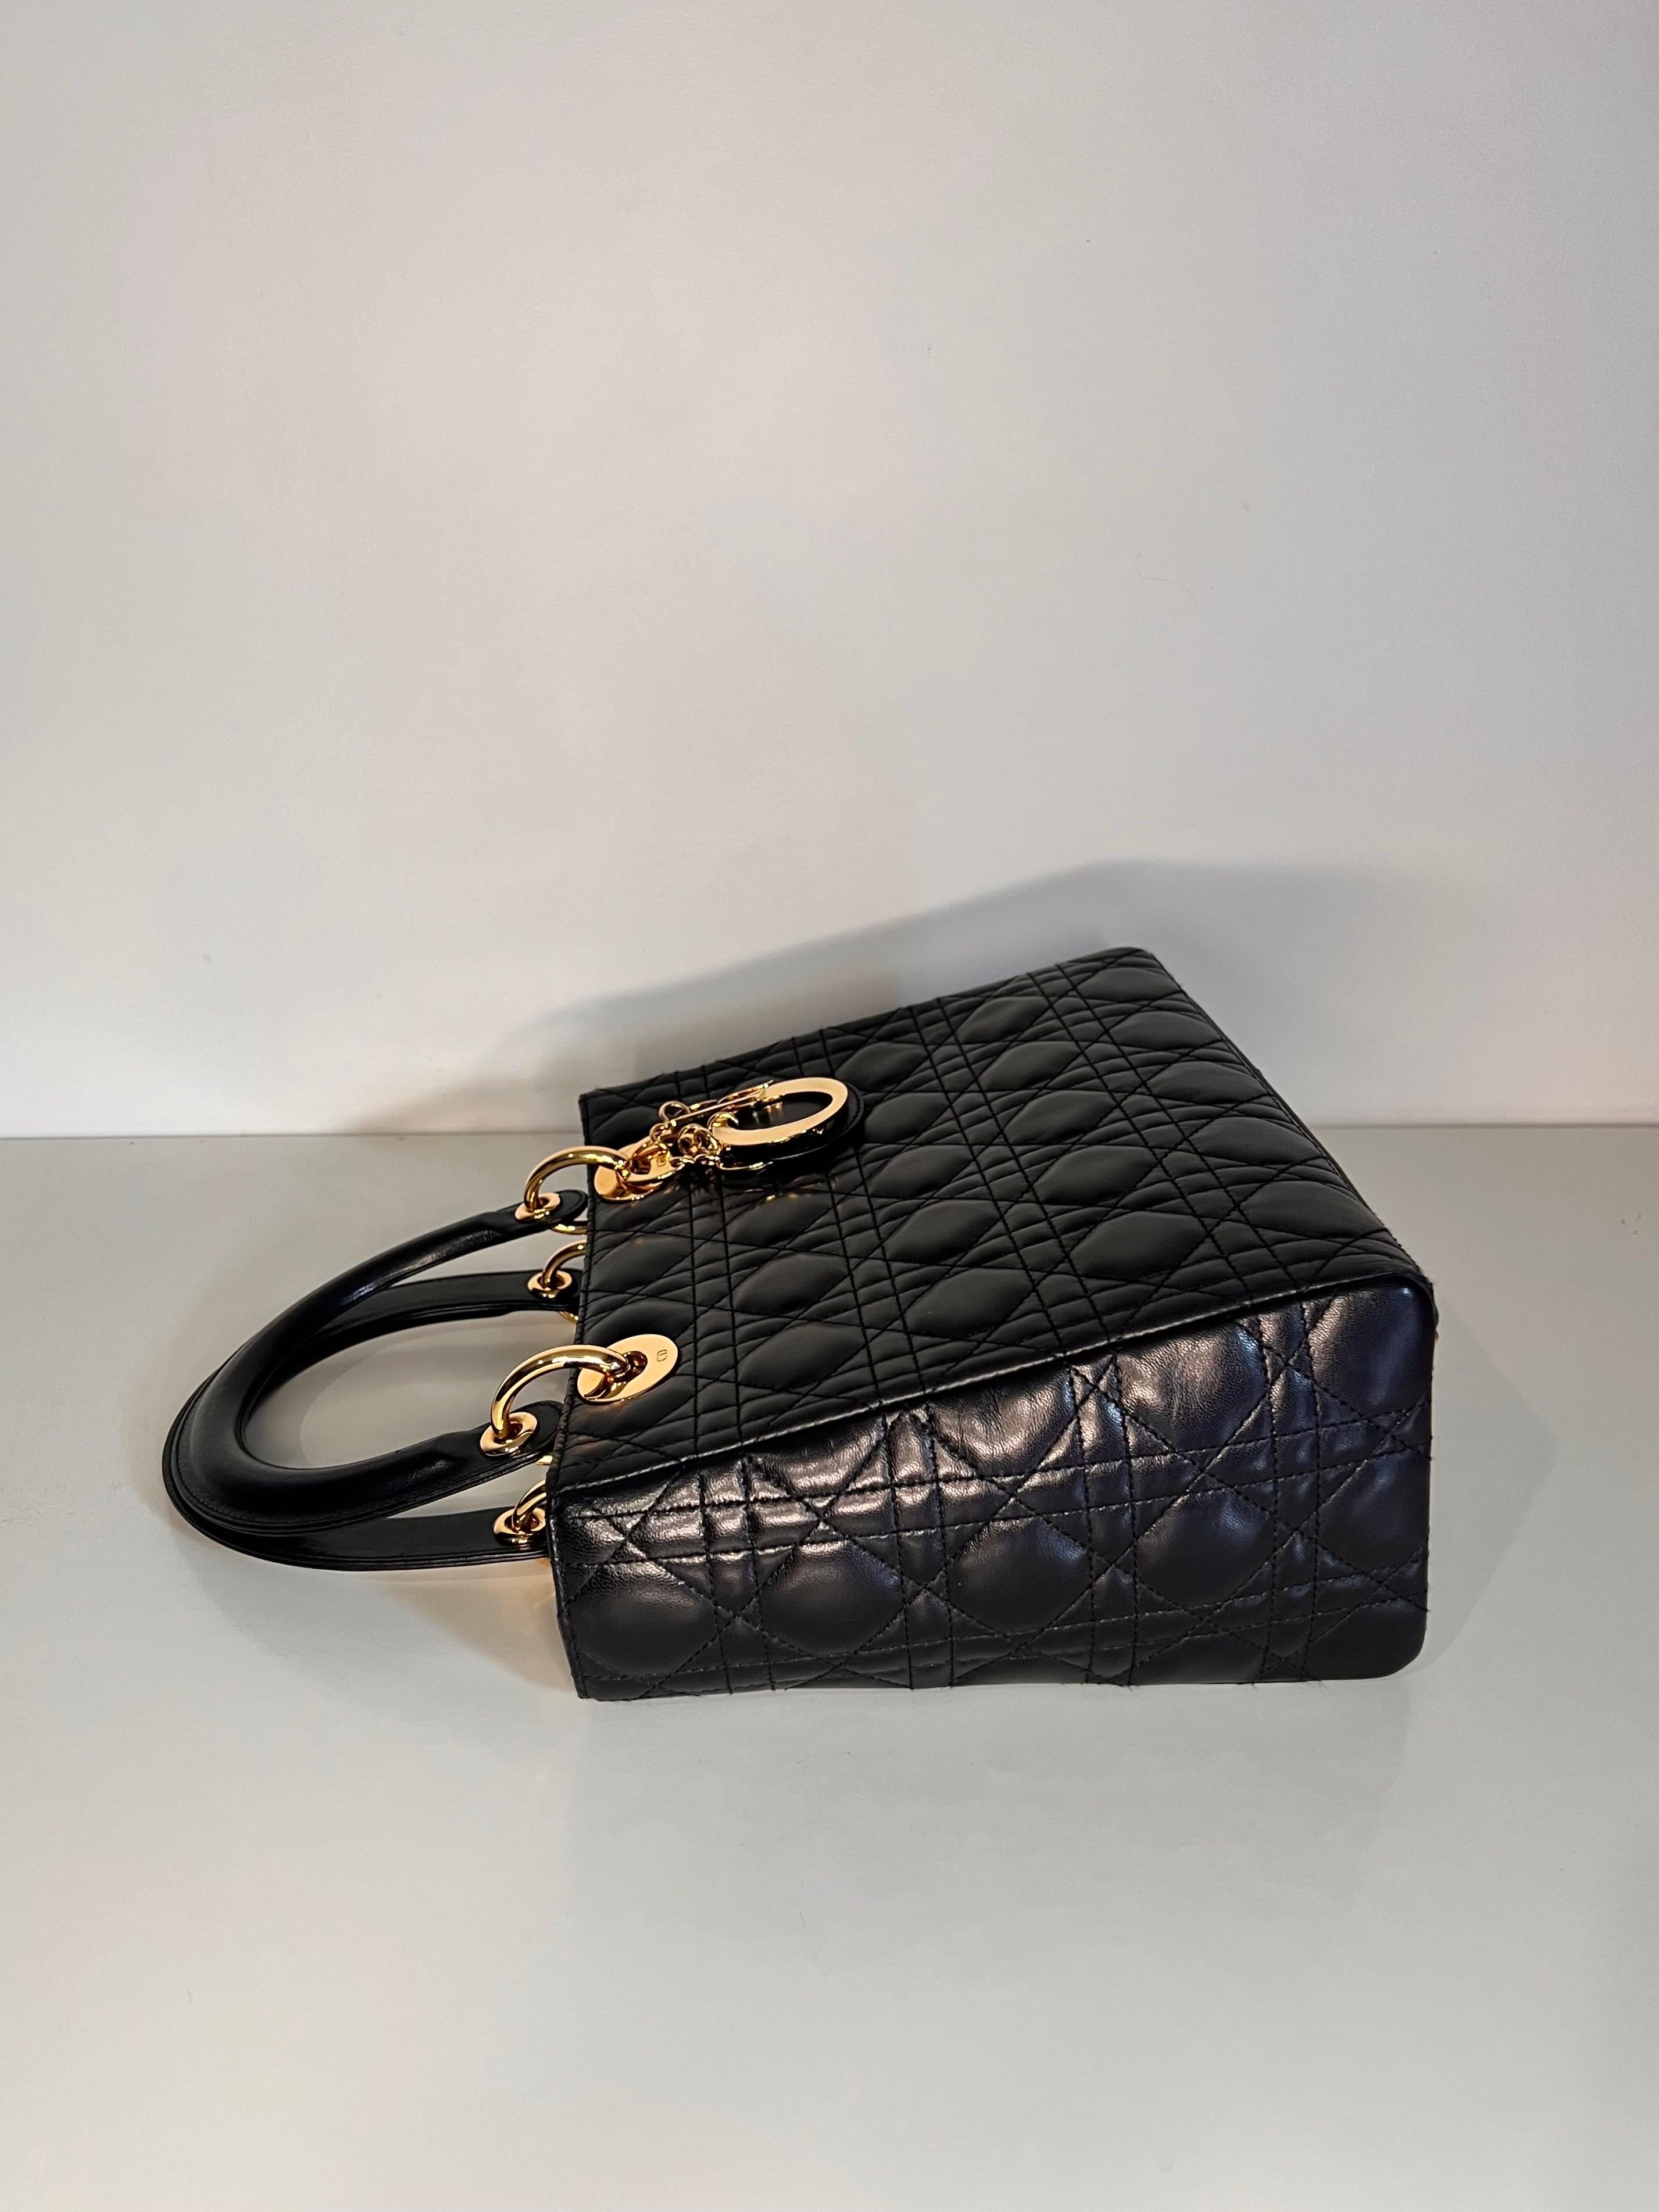 Lady DIOR quilted handbag with gold hardware, famously worn by Princess Diana  2